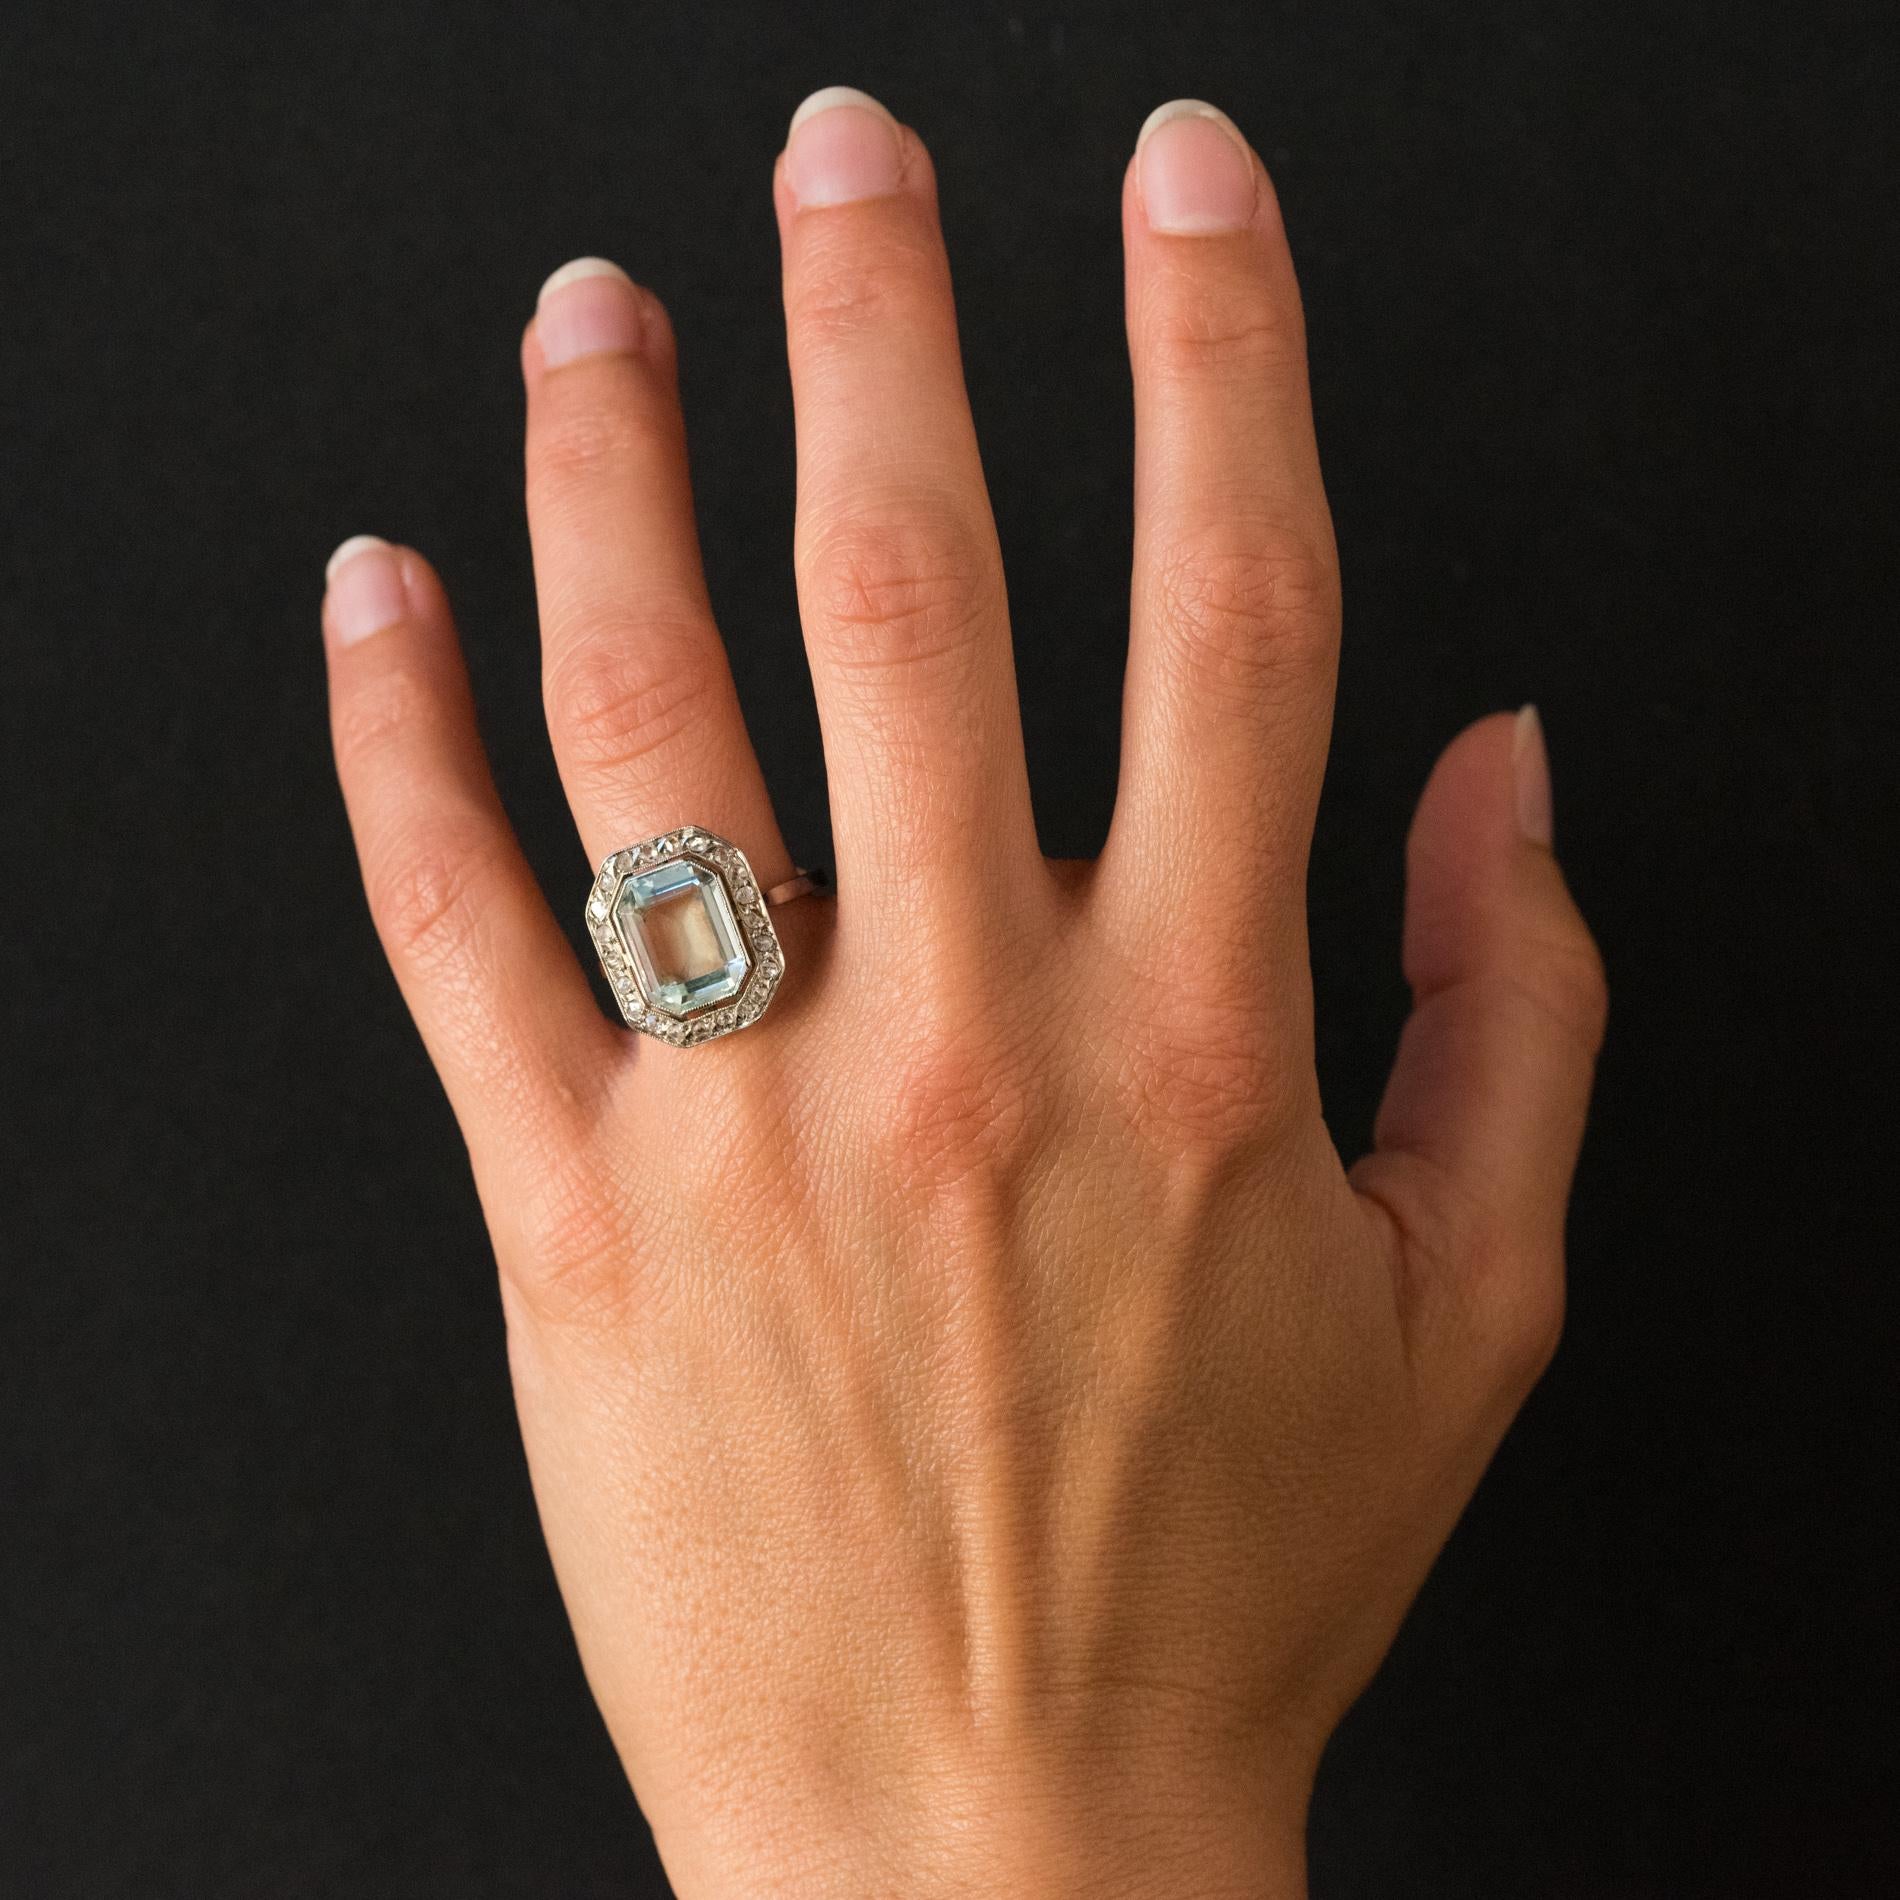 Ring in 18 karats white gold, eagle's head hallmark.
Elegant antique ring, it is set in the center of a degrees-cut aquamarine, set with millegrains. The entourage is composed of 22 rose- cut diamonds. The mounting is pierced and flat on the